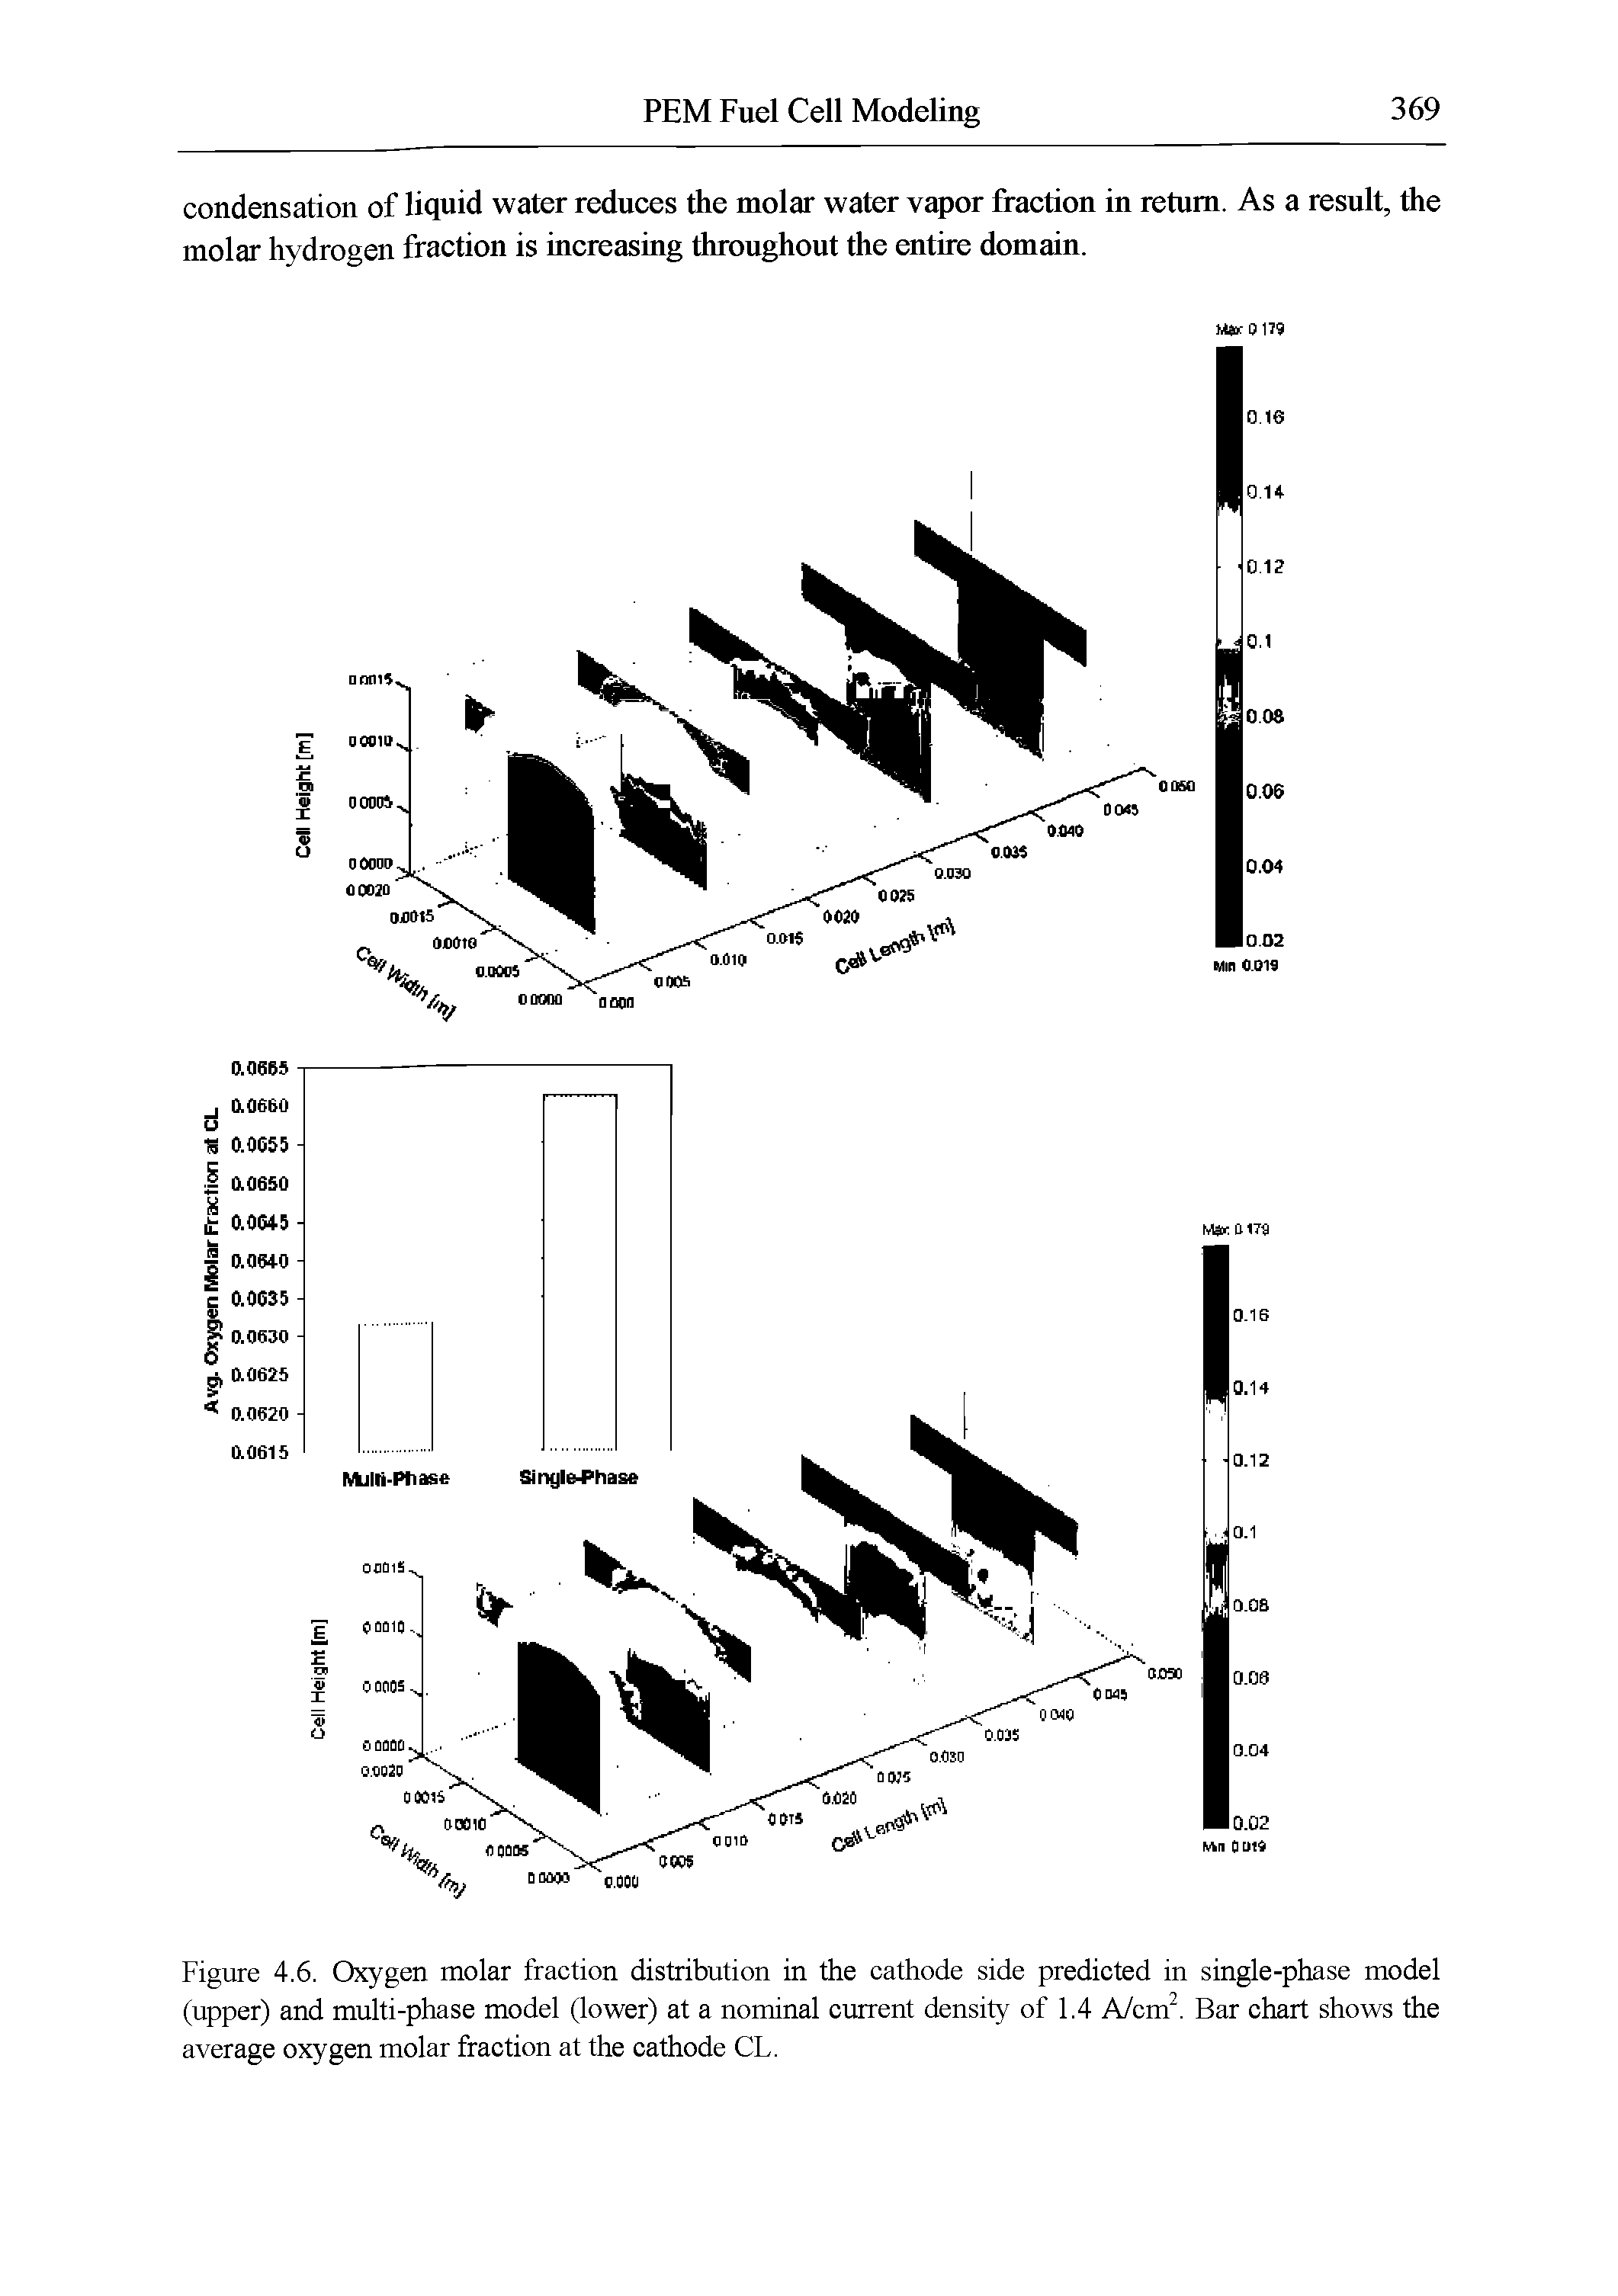 Figure 4.6. Oxygen molar fraction distribution in the cathode side predicted in single-phase model (upper) and multi-phase model (lower) at a nominal current density of 1.4 PJcvii. Bar chart shows the average oxygen molar fraction at the cathode CL.